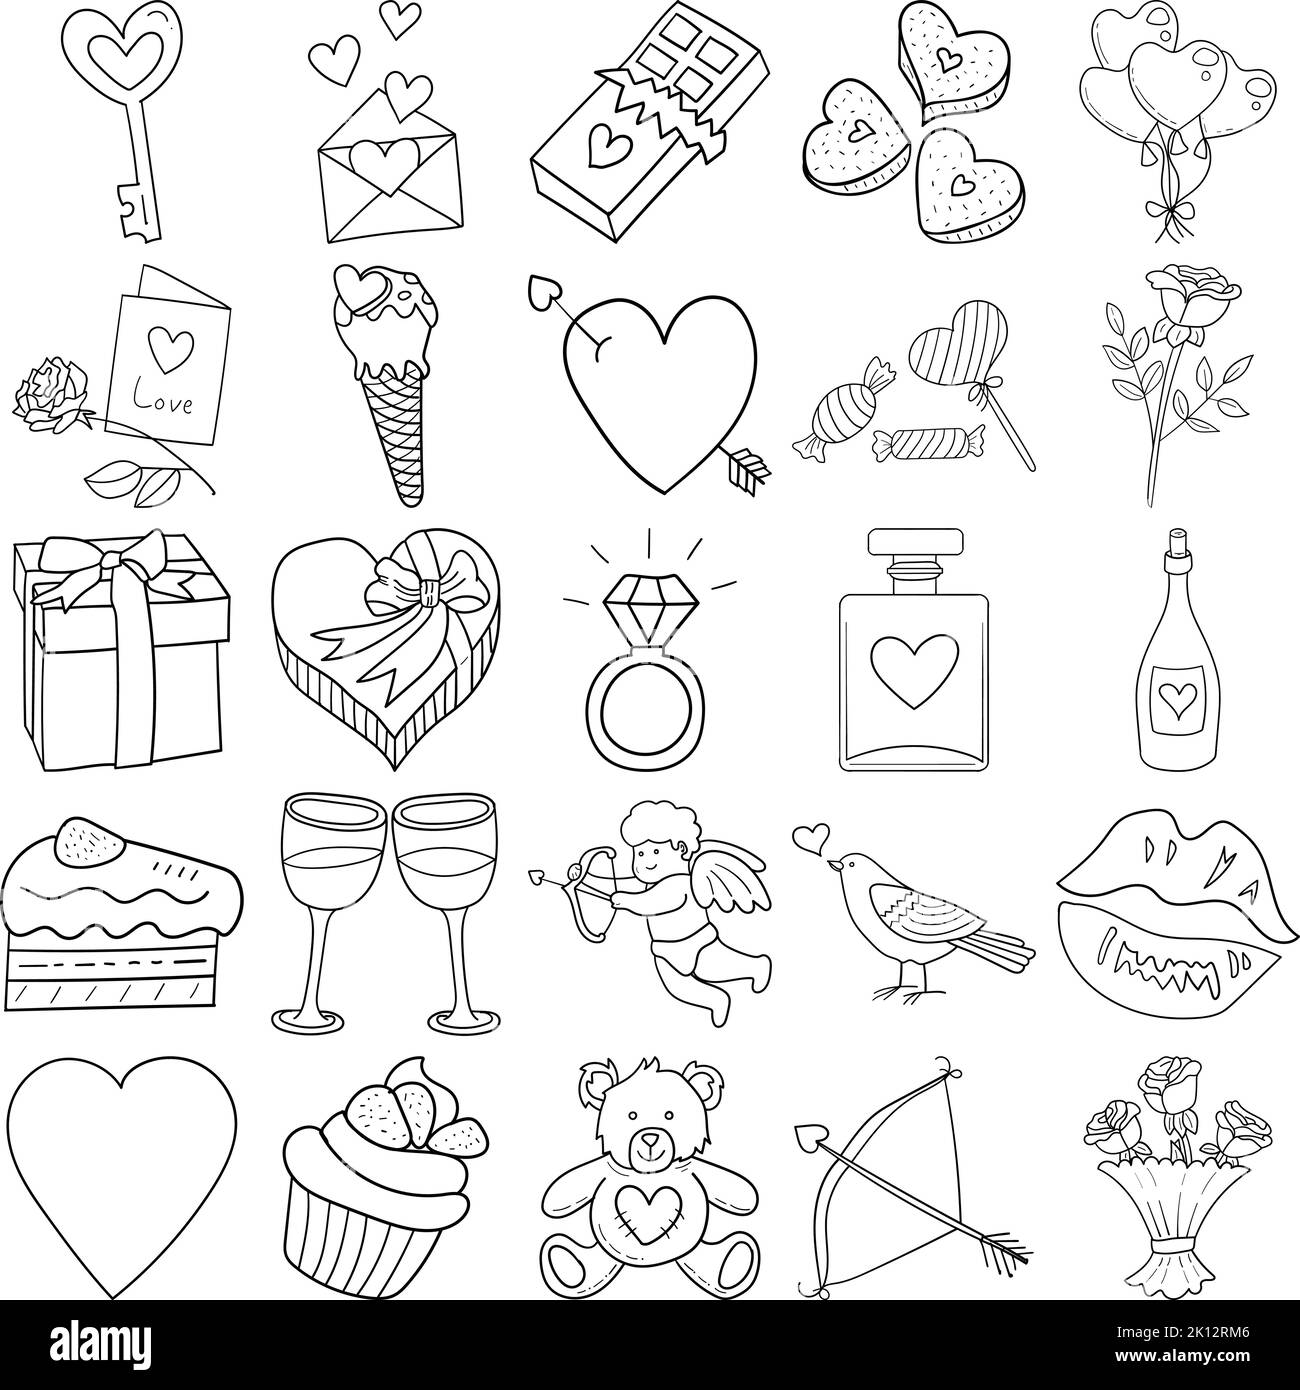 Valentine Hand Drawn Doodle Line Art Outline Set Containing Card, Envelope, Perfume, Kiss, Bird, Rose, Chocolate, Bouquet, Cupid, Lovesick, Key Stock Vector